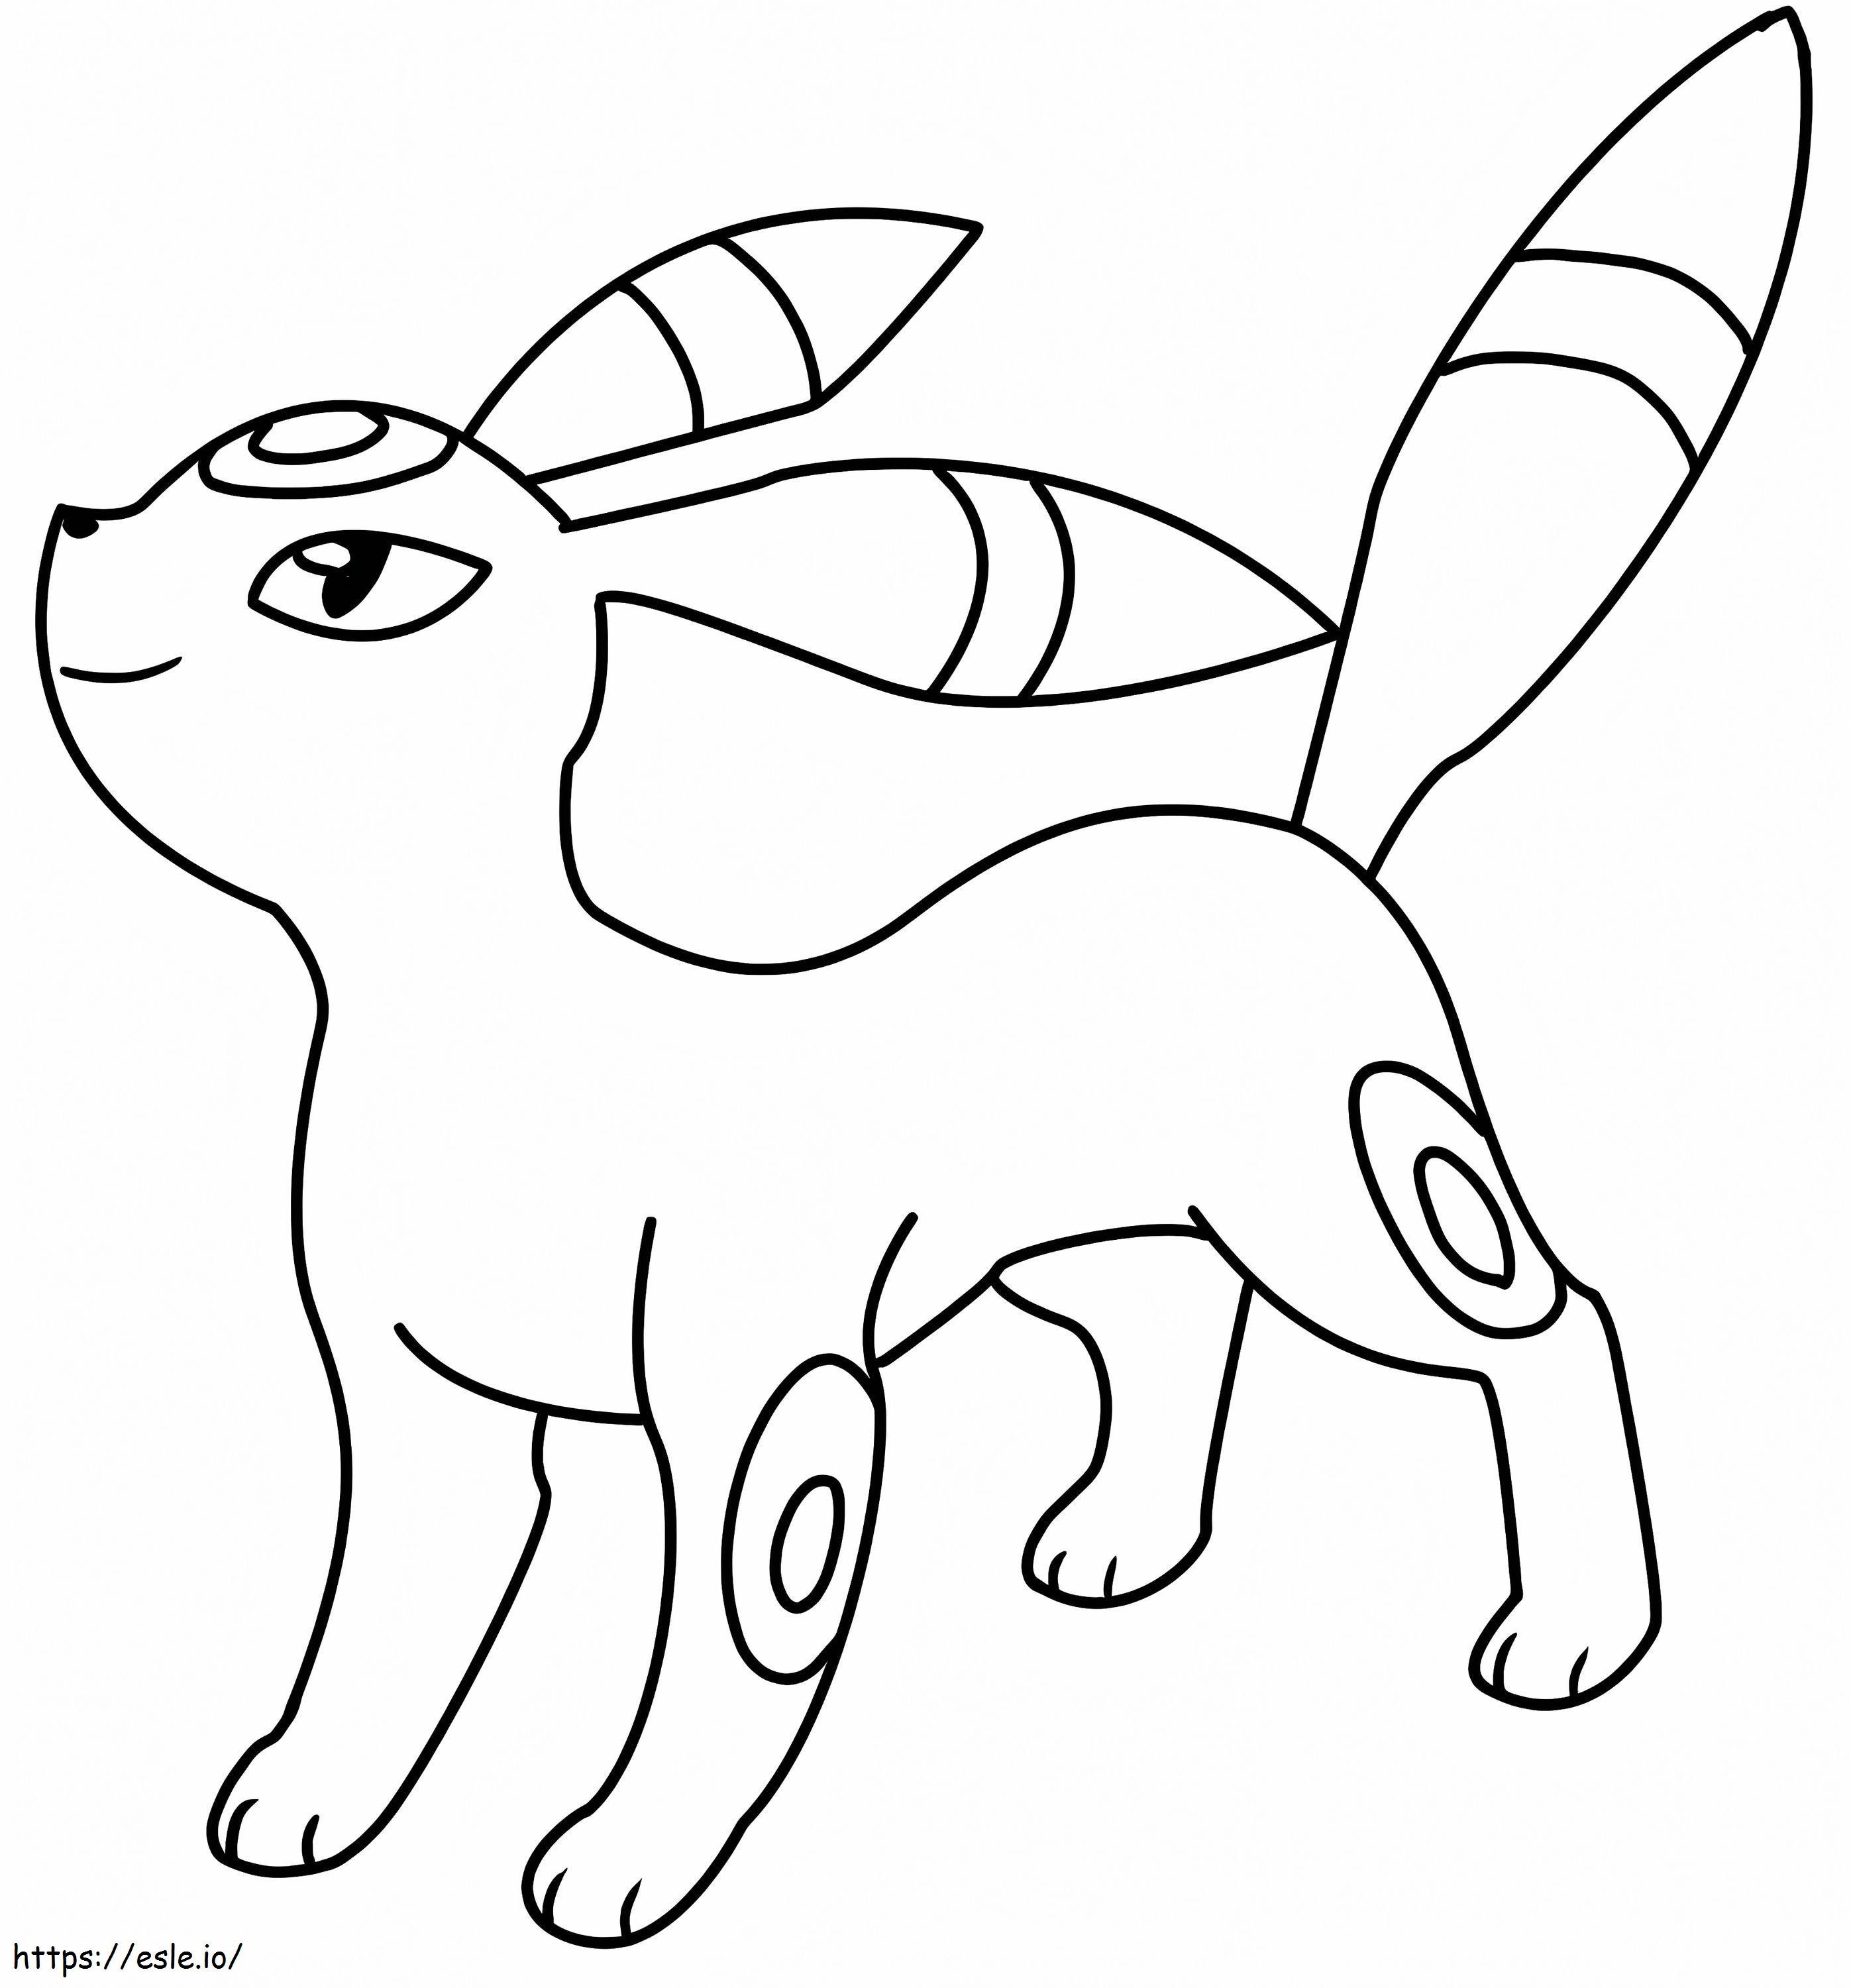 Umbreon 4 coloring page